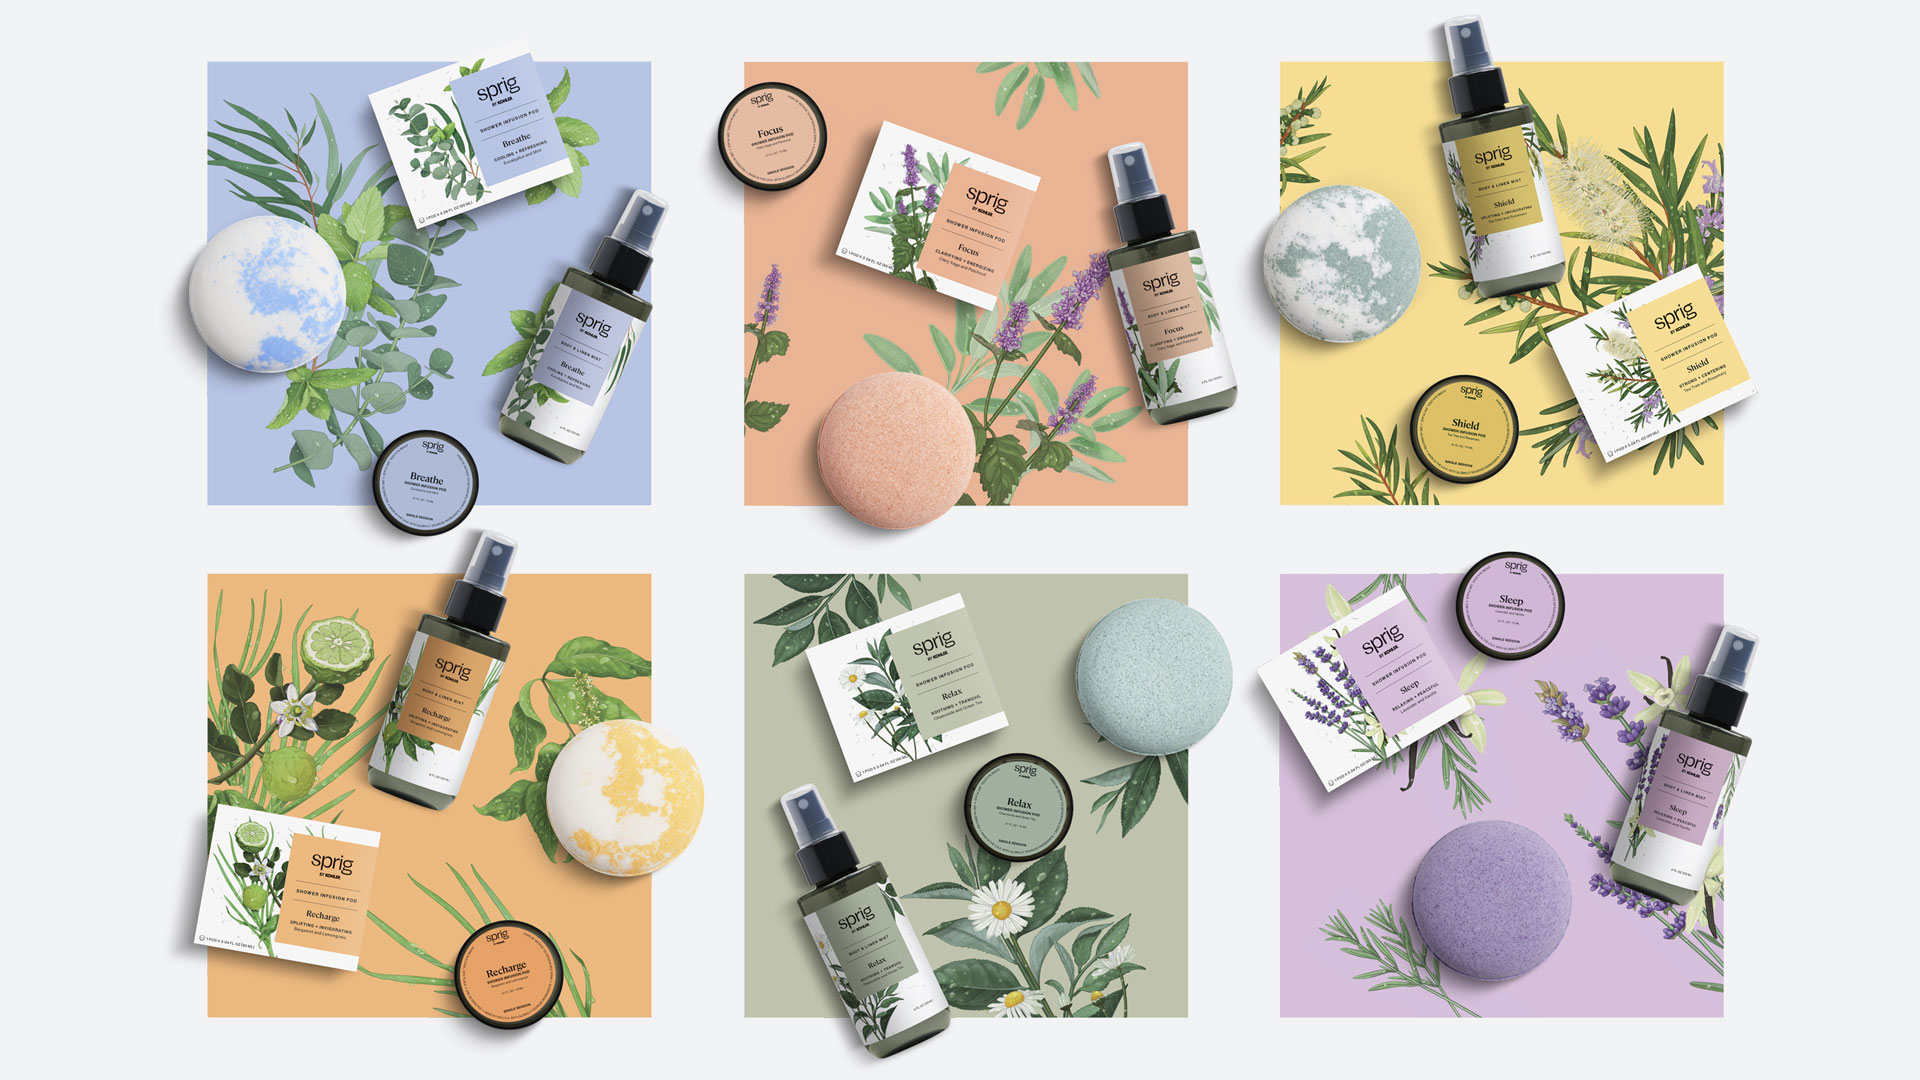 Sprig's clean, botanical blends are designed to match your moments throughout the day and are available in shower infusion pods, premium bath bombs, and versatile body & linen mists.